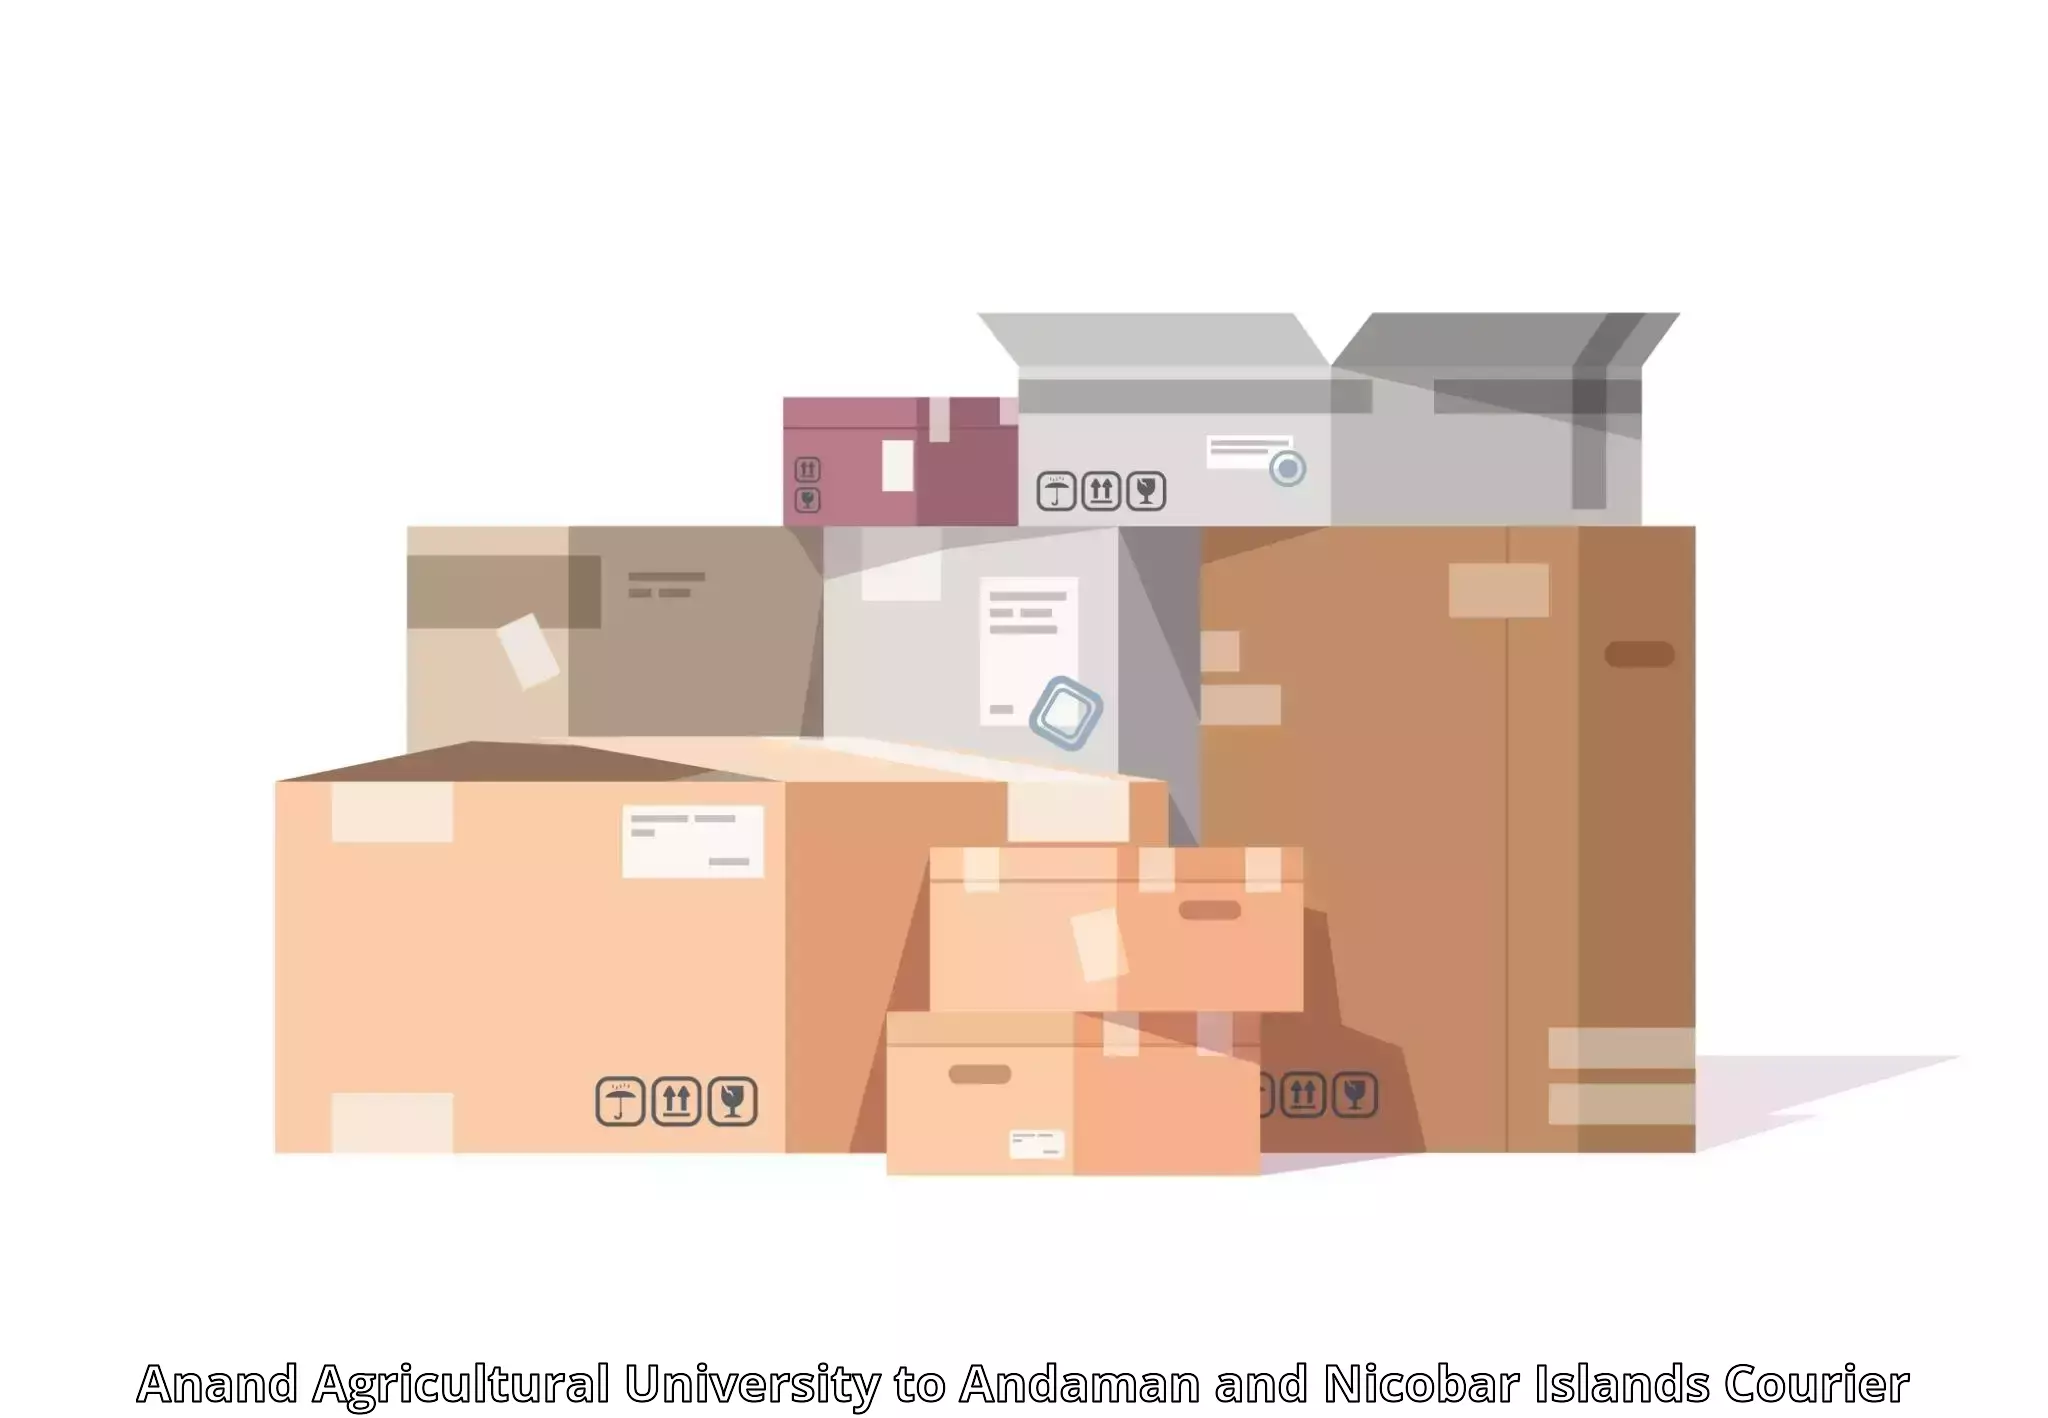 High-capacity parcel service Anand Agricultural University to South Andaman